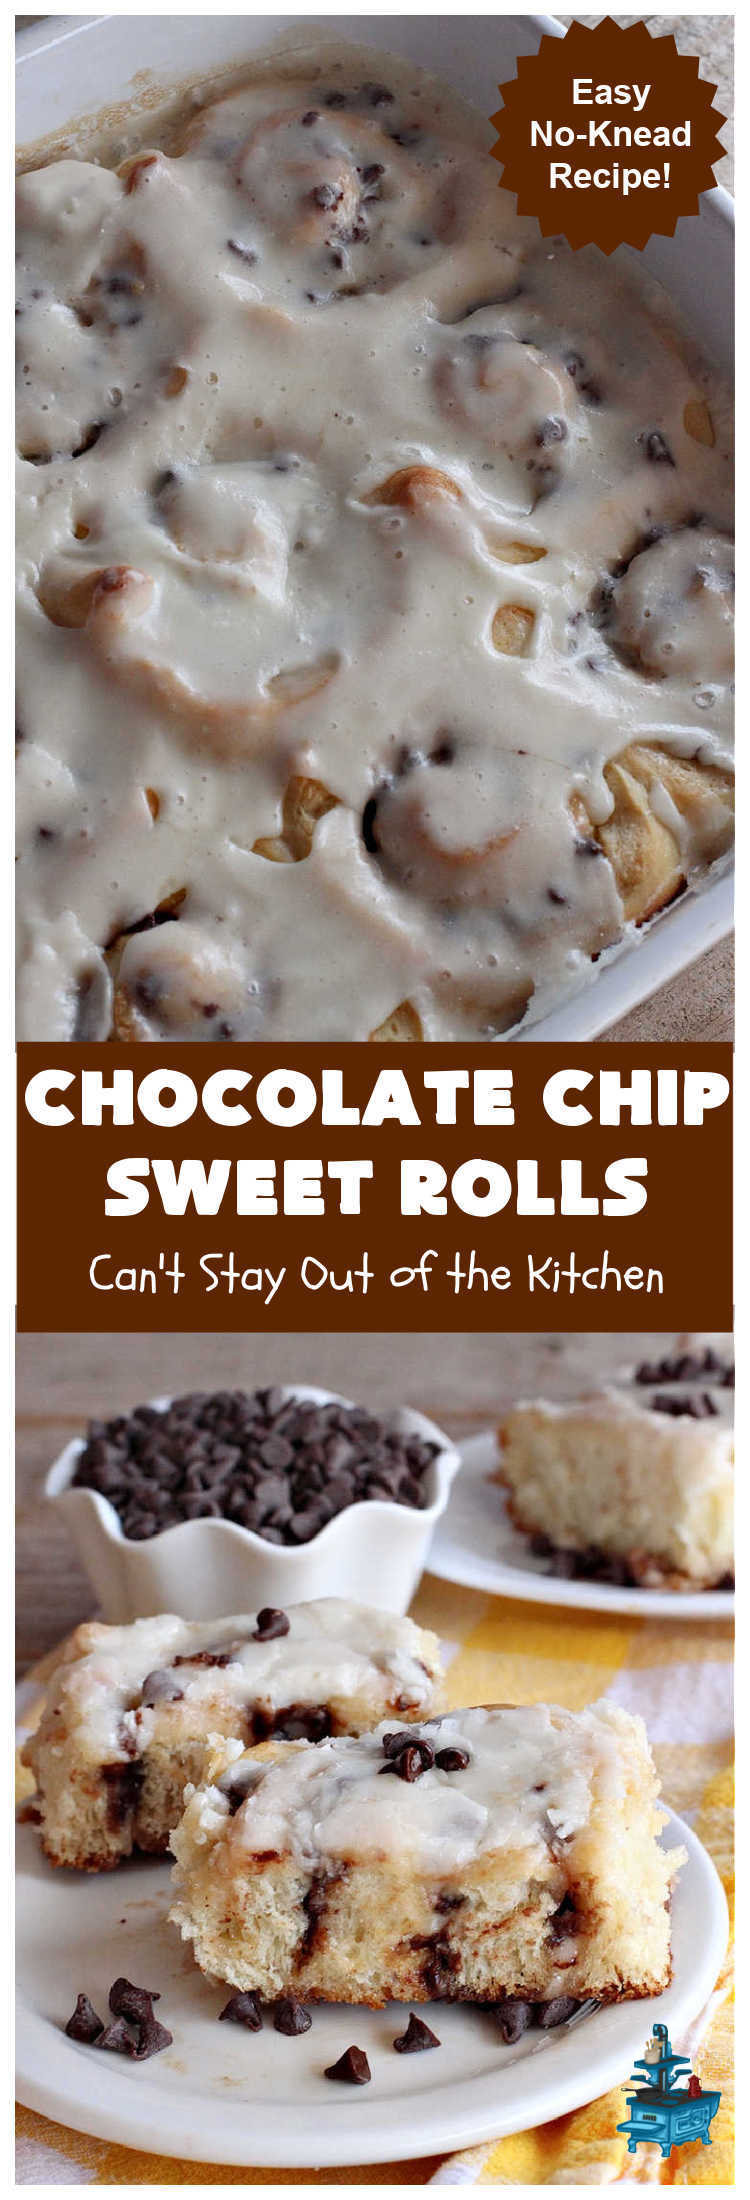 Chocolate Chip Sweet Rolls | Can't Stay Out of the Kitchen | These luscious #SweetRolls made with #ChocolateChips are absolutely superb. The icing is thick and drool-worthy. If you enjoy #chocolate, you'll love having it in sweet #rolls. Great #breakfast idea for #holidays, weekends or company. #ChocolateChipSweetRolls 